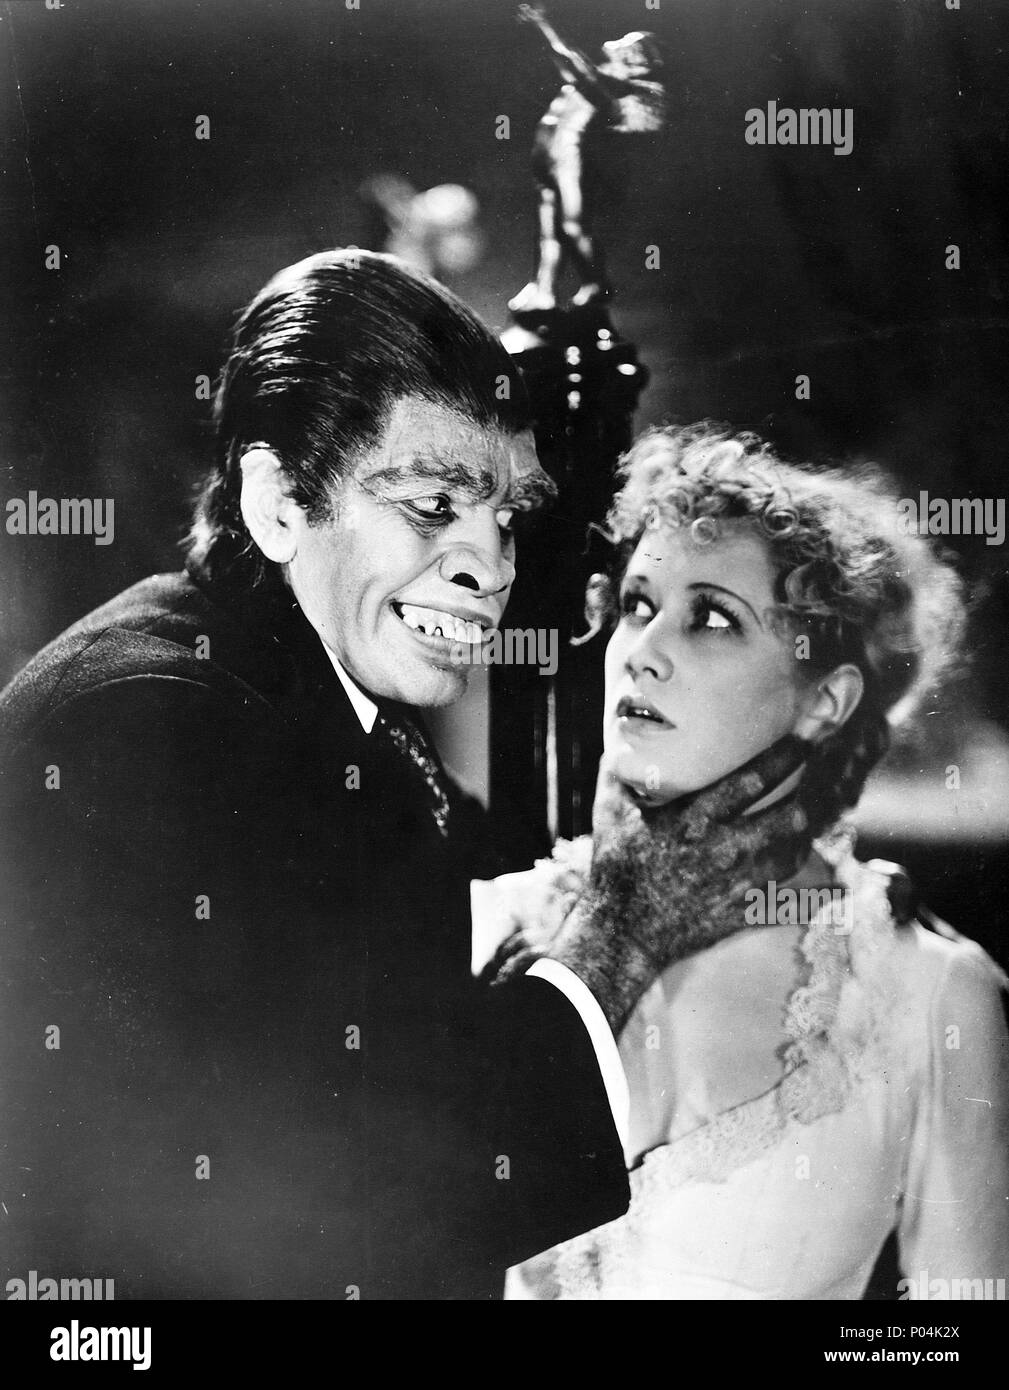 Original Film Title: DR. JEKYLL AND MR. HYDE.  English Title: DR. JEKYLL AND MR. HYDE.  Film Director: ROUBEN MAMOULIAN.  Year: 1931.  Stars: FREDRIC MARCH; MIRIAM HOPKINS. Credit: PARAMOUNT PICTURES / Album Stock Photo